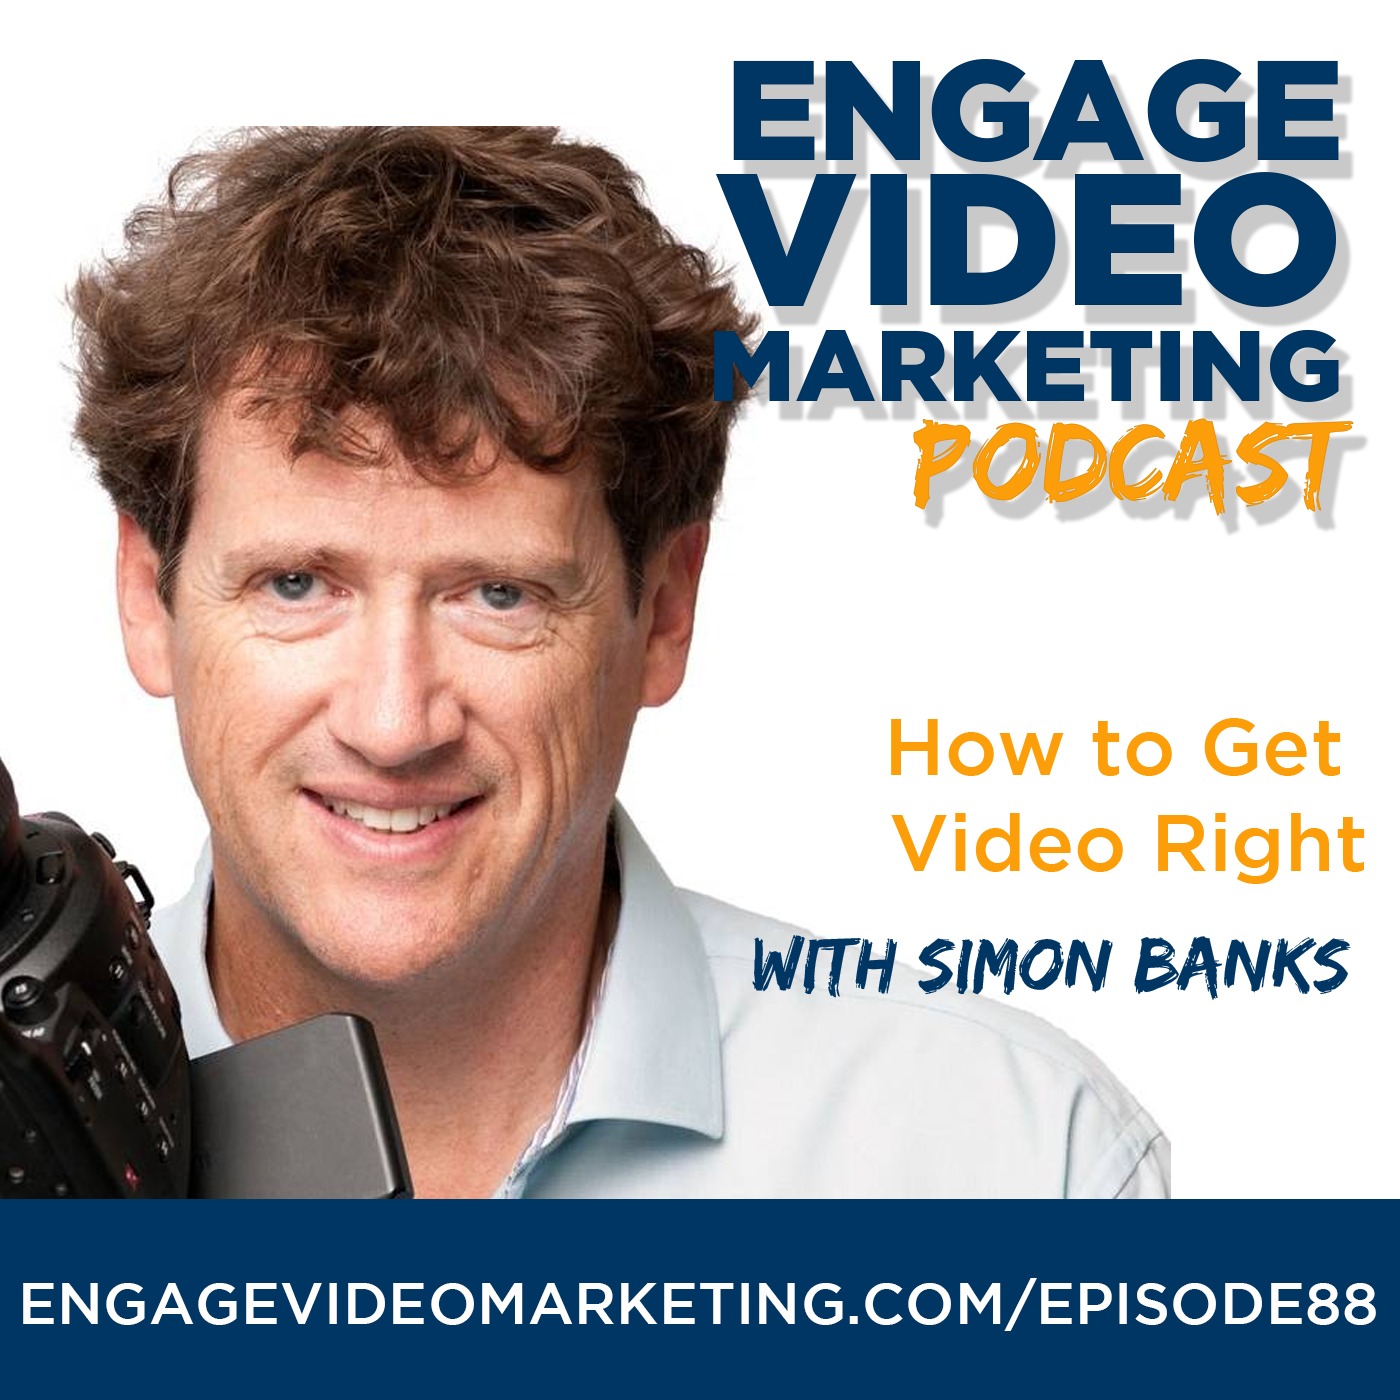 How to Get Video Right with Simon Banks